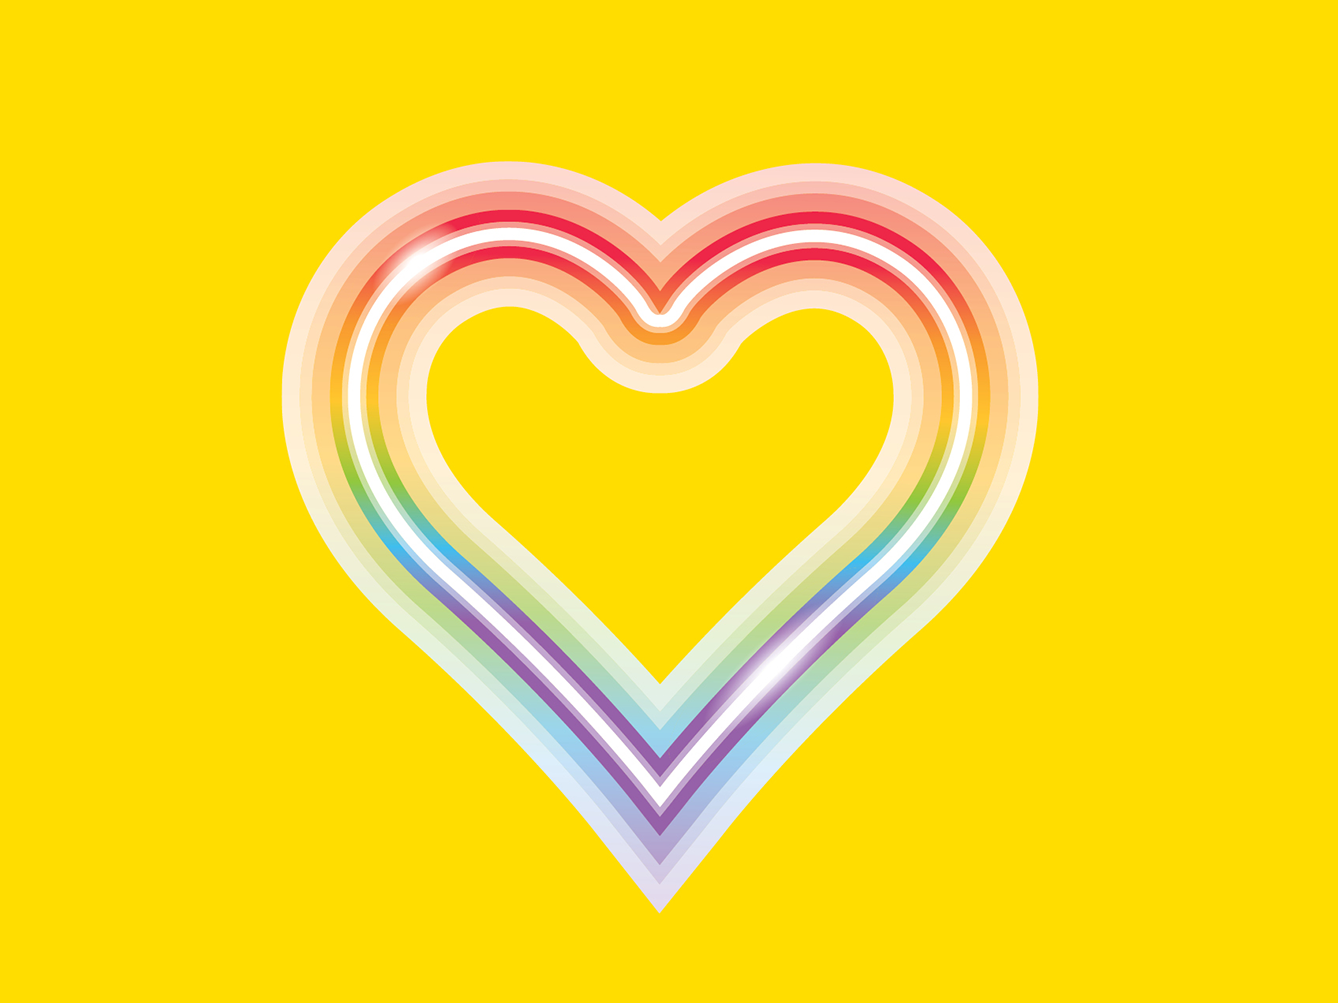 Decorative image of a rainbow colour heart over a yellow ground